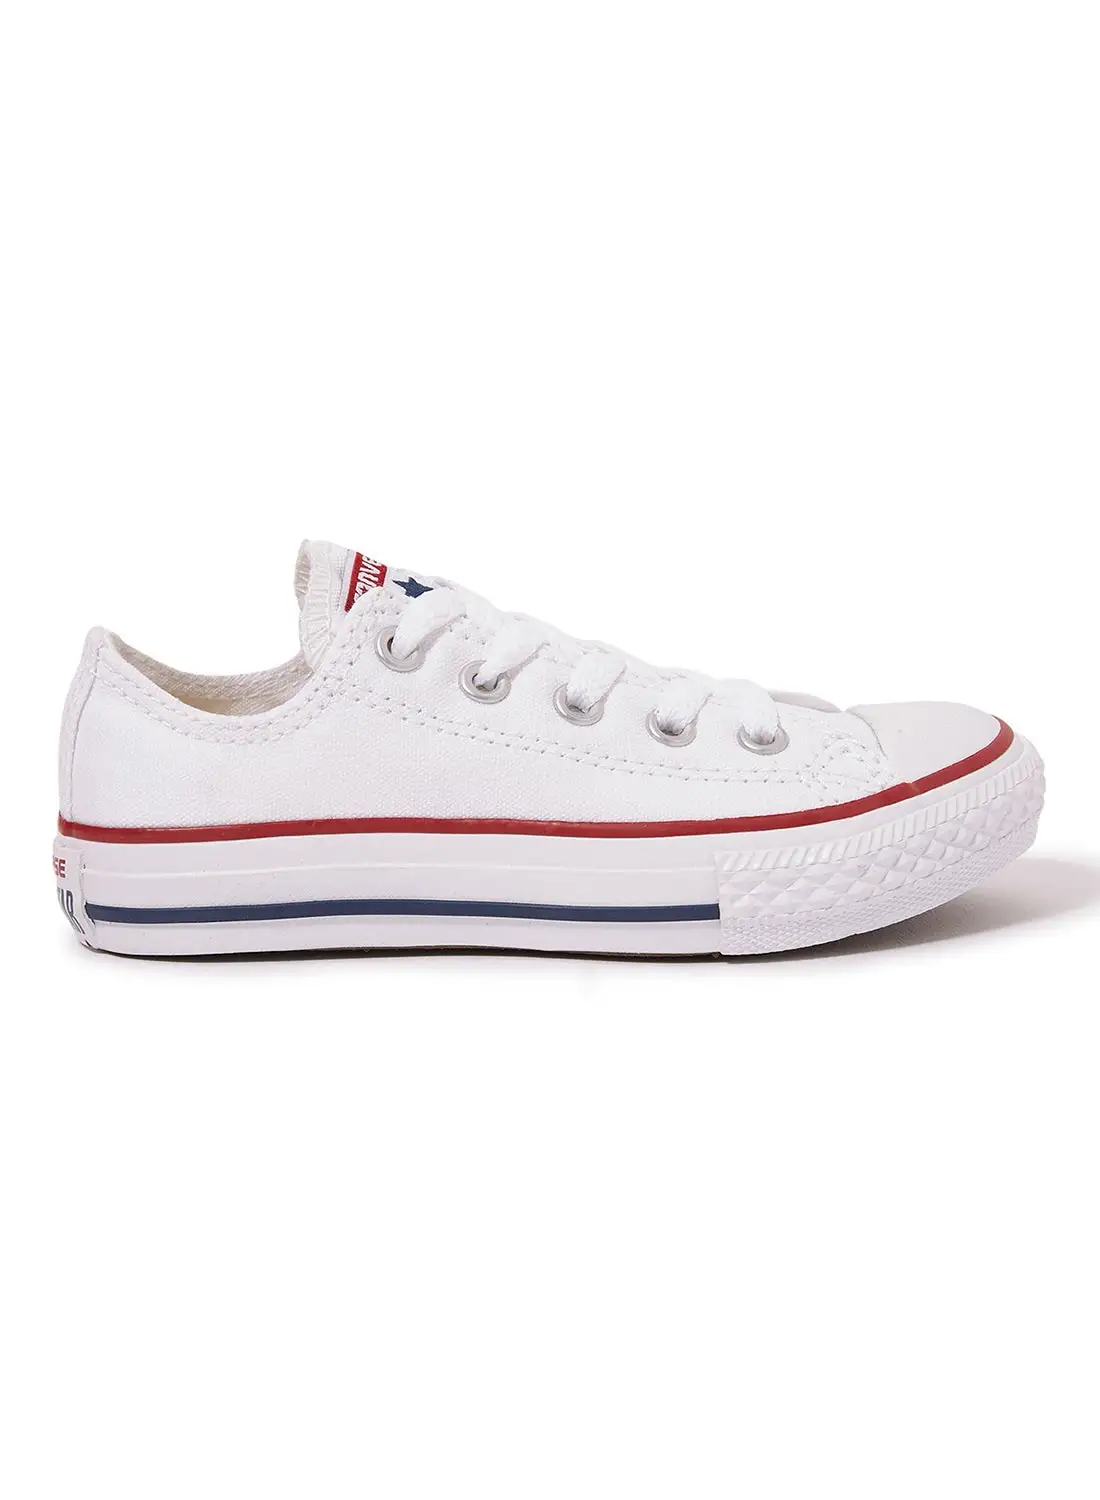 CONVERSE Kids Unisex Chuck Taylor All Stars Sneakers White